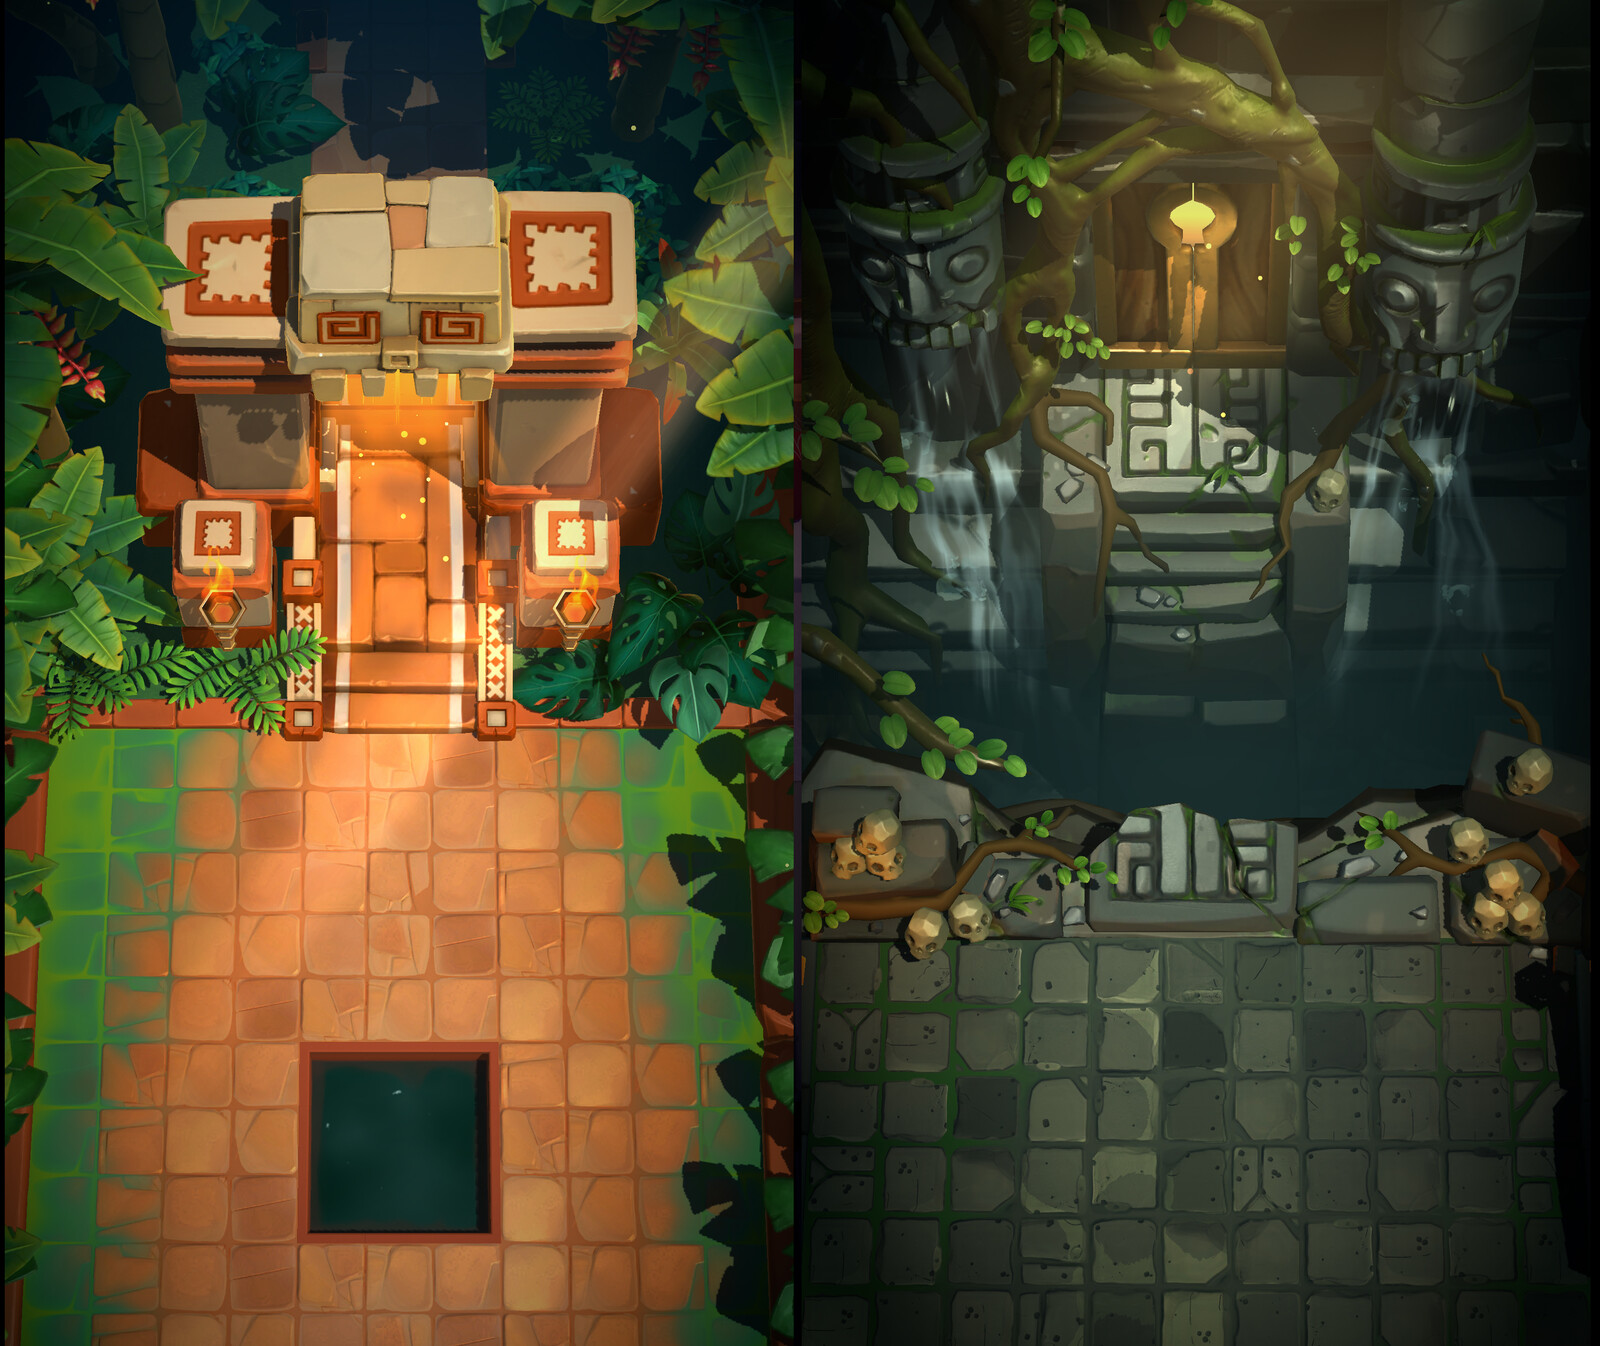 Creation of foliage, roots as well as creation of the door and game play area floor. The image on the right hand side was where I took initial direction from art director  and then concepted in 3d, I also took decisions on colour palette and lighting.